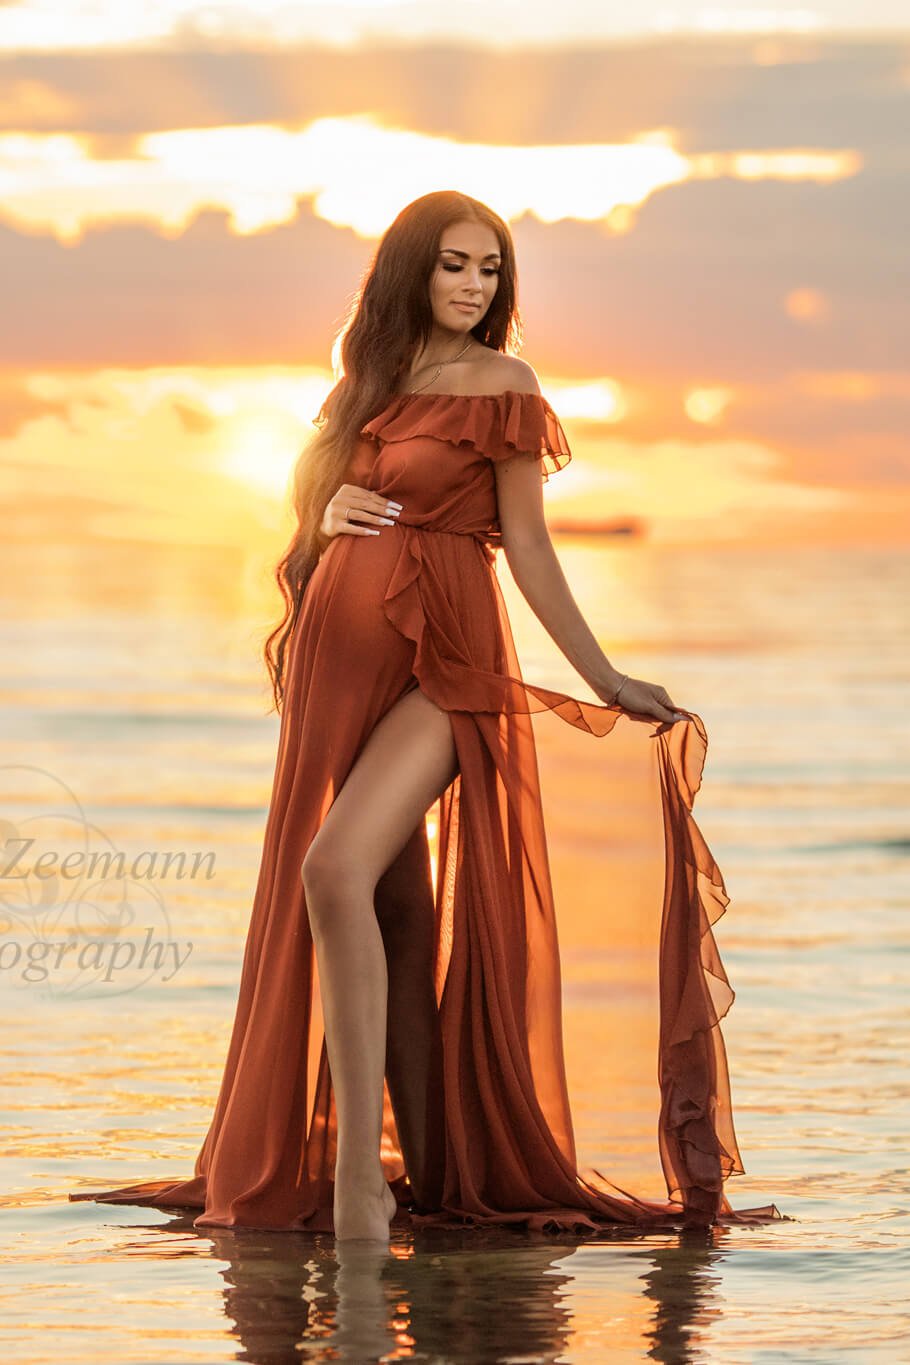 Brunette pregnant model poses for a maternity photosession outside on the beach. She stands with her feet in the water and wears a Mii-Estilo Florian Dress in Rust Orange color. The dress can be completely seen in the photo - it is made of chiffon and features an off the shoulder neckline with ruffle details. The ruffle details can also been seen in the split from the circle skirt. The model has her eyes closed, one hand holding her bump and the other hand holding her skirt. 